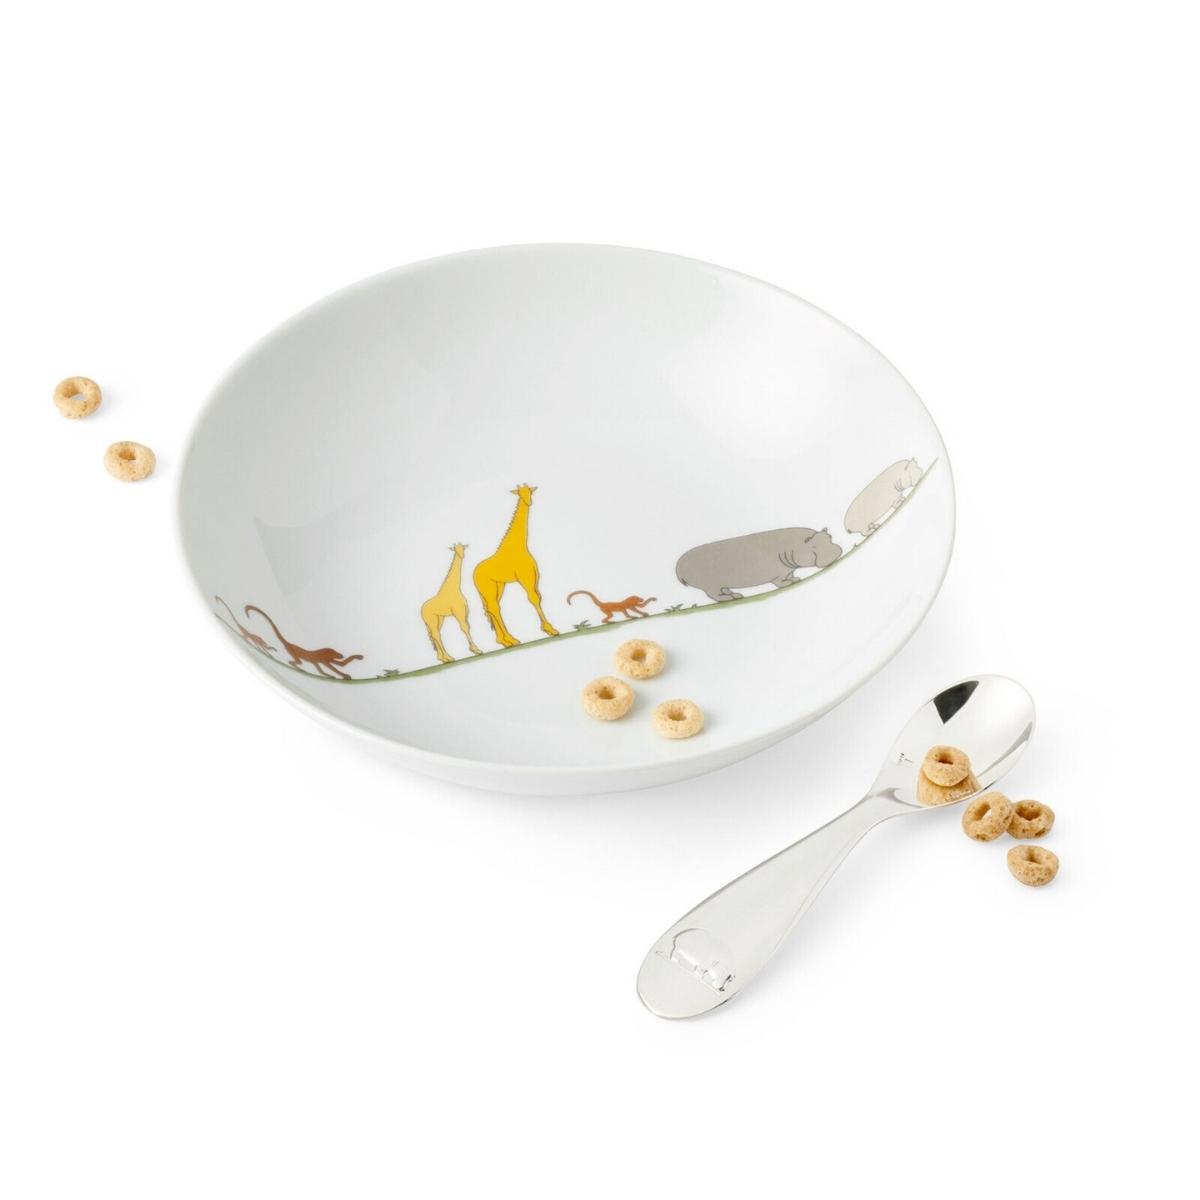 Savane Baby Spoon and Plate Set Silver Plated